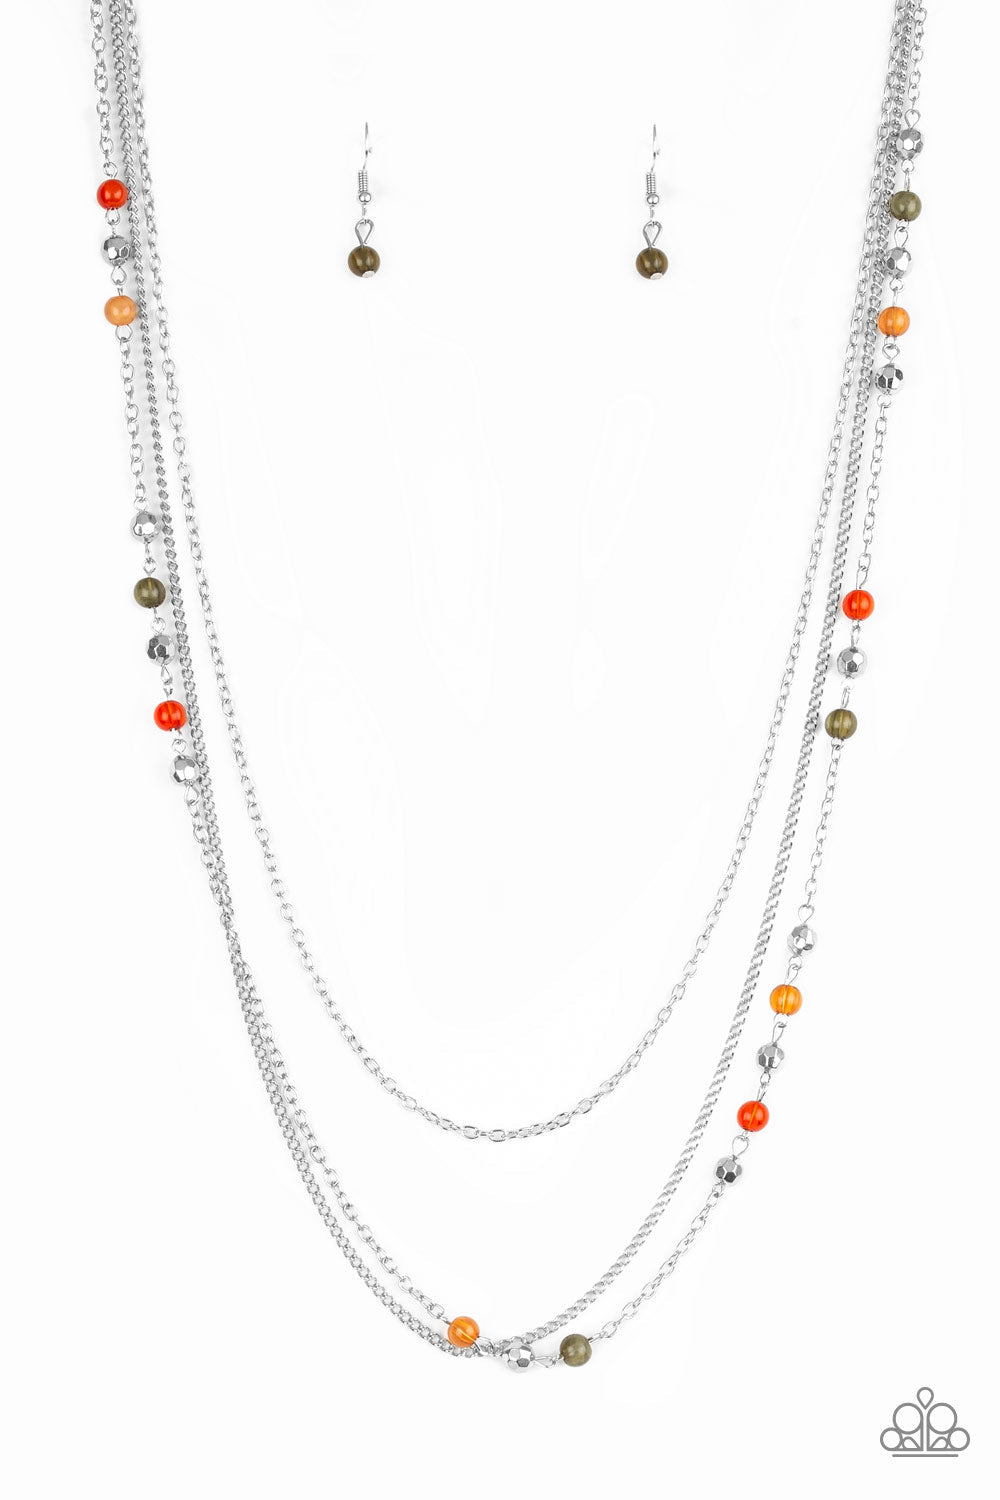 Colorful Cadence - Multi Color Necklace - Paparazzi Accessories - Faceted silver and glassy green, orange and red beads trickle along shimmery silver chains down the chest for a whimsical look. Features an adjustable clasp closure.  Bejeweled Accessories By Kristie - Trendy fashion jewelry for everyone -